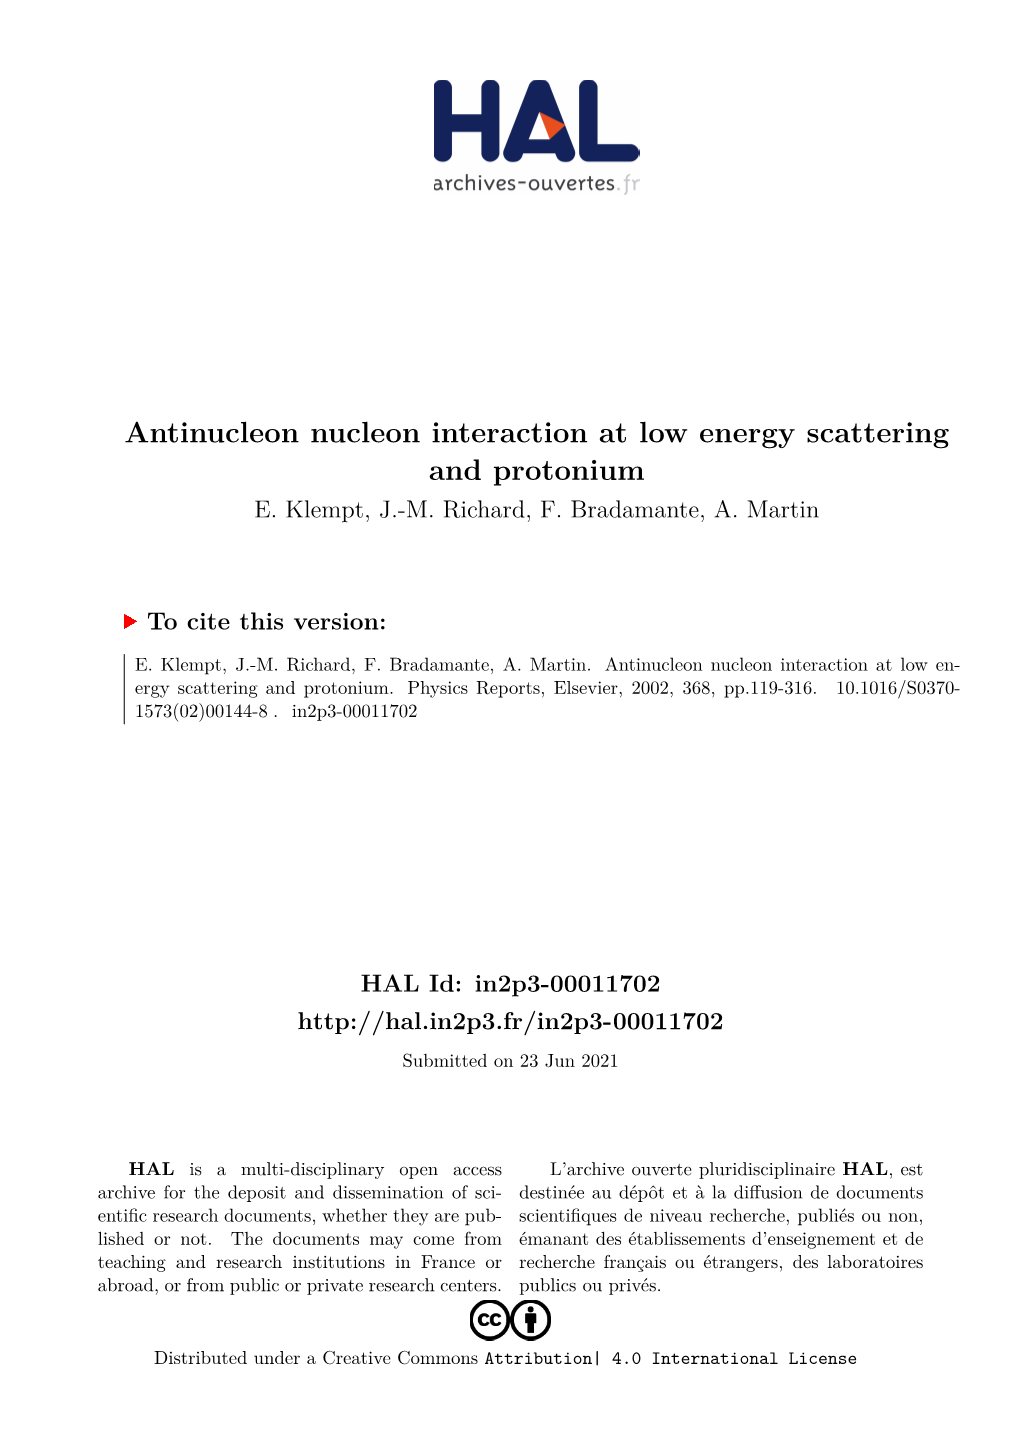 Antinucleon Nucleon Interaction at Low Energy Scattering and Protonium E